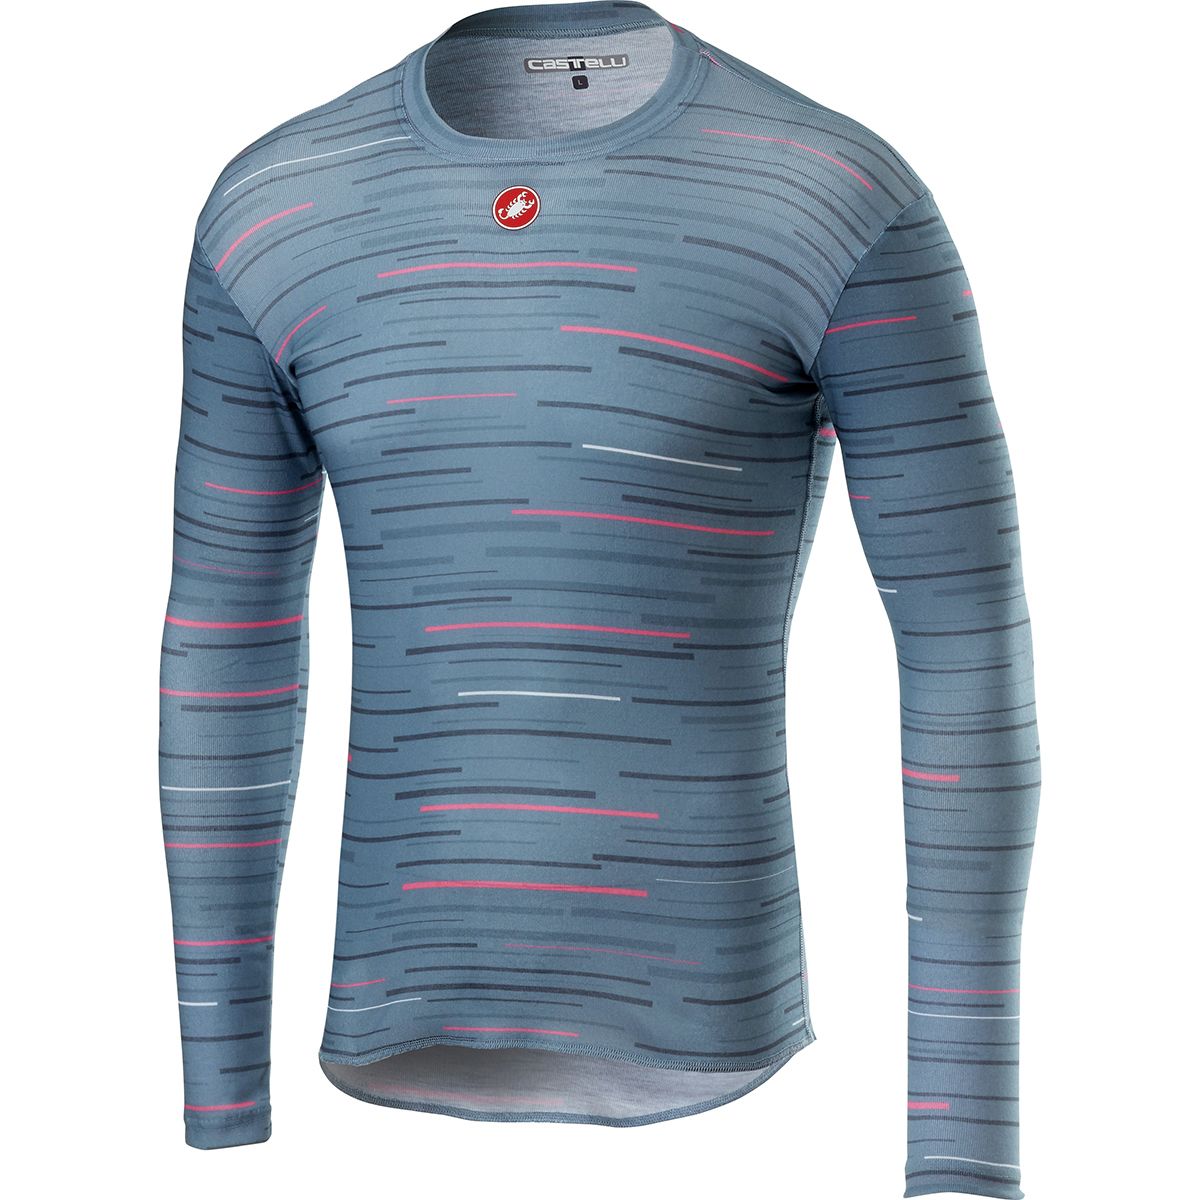 Castelli Prosecco R Long-Sleeve Base Layer Top - Men's